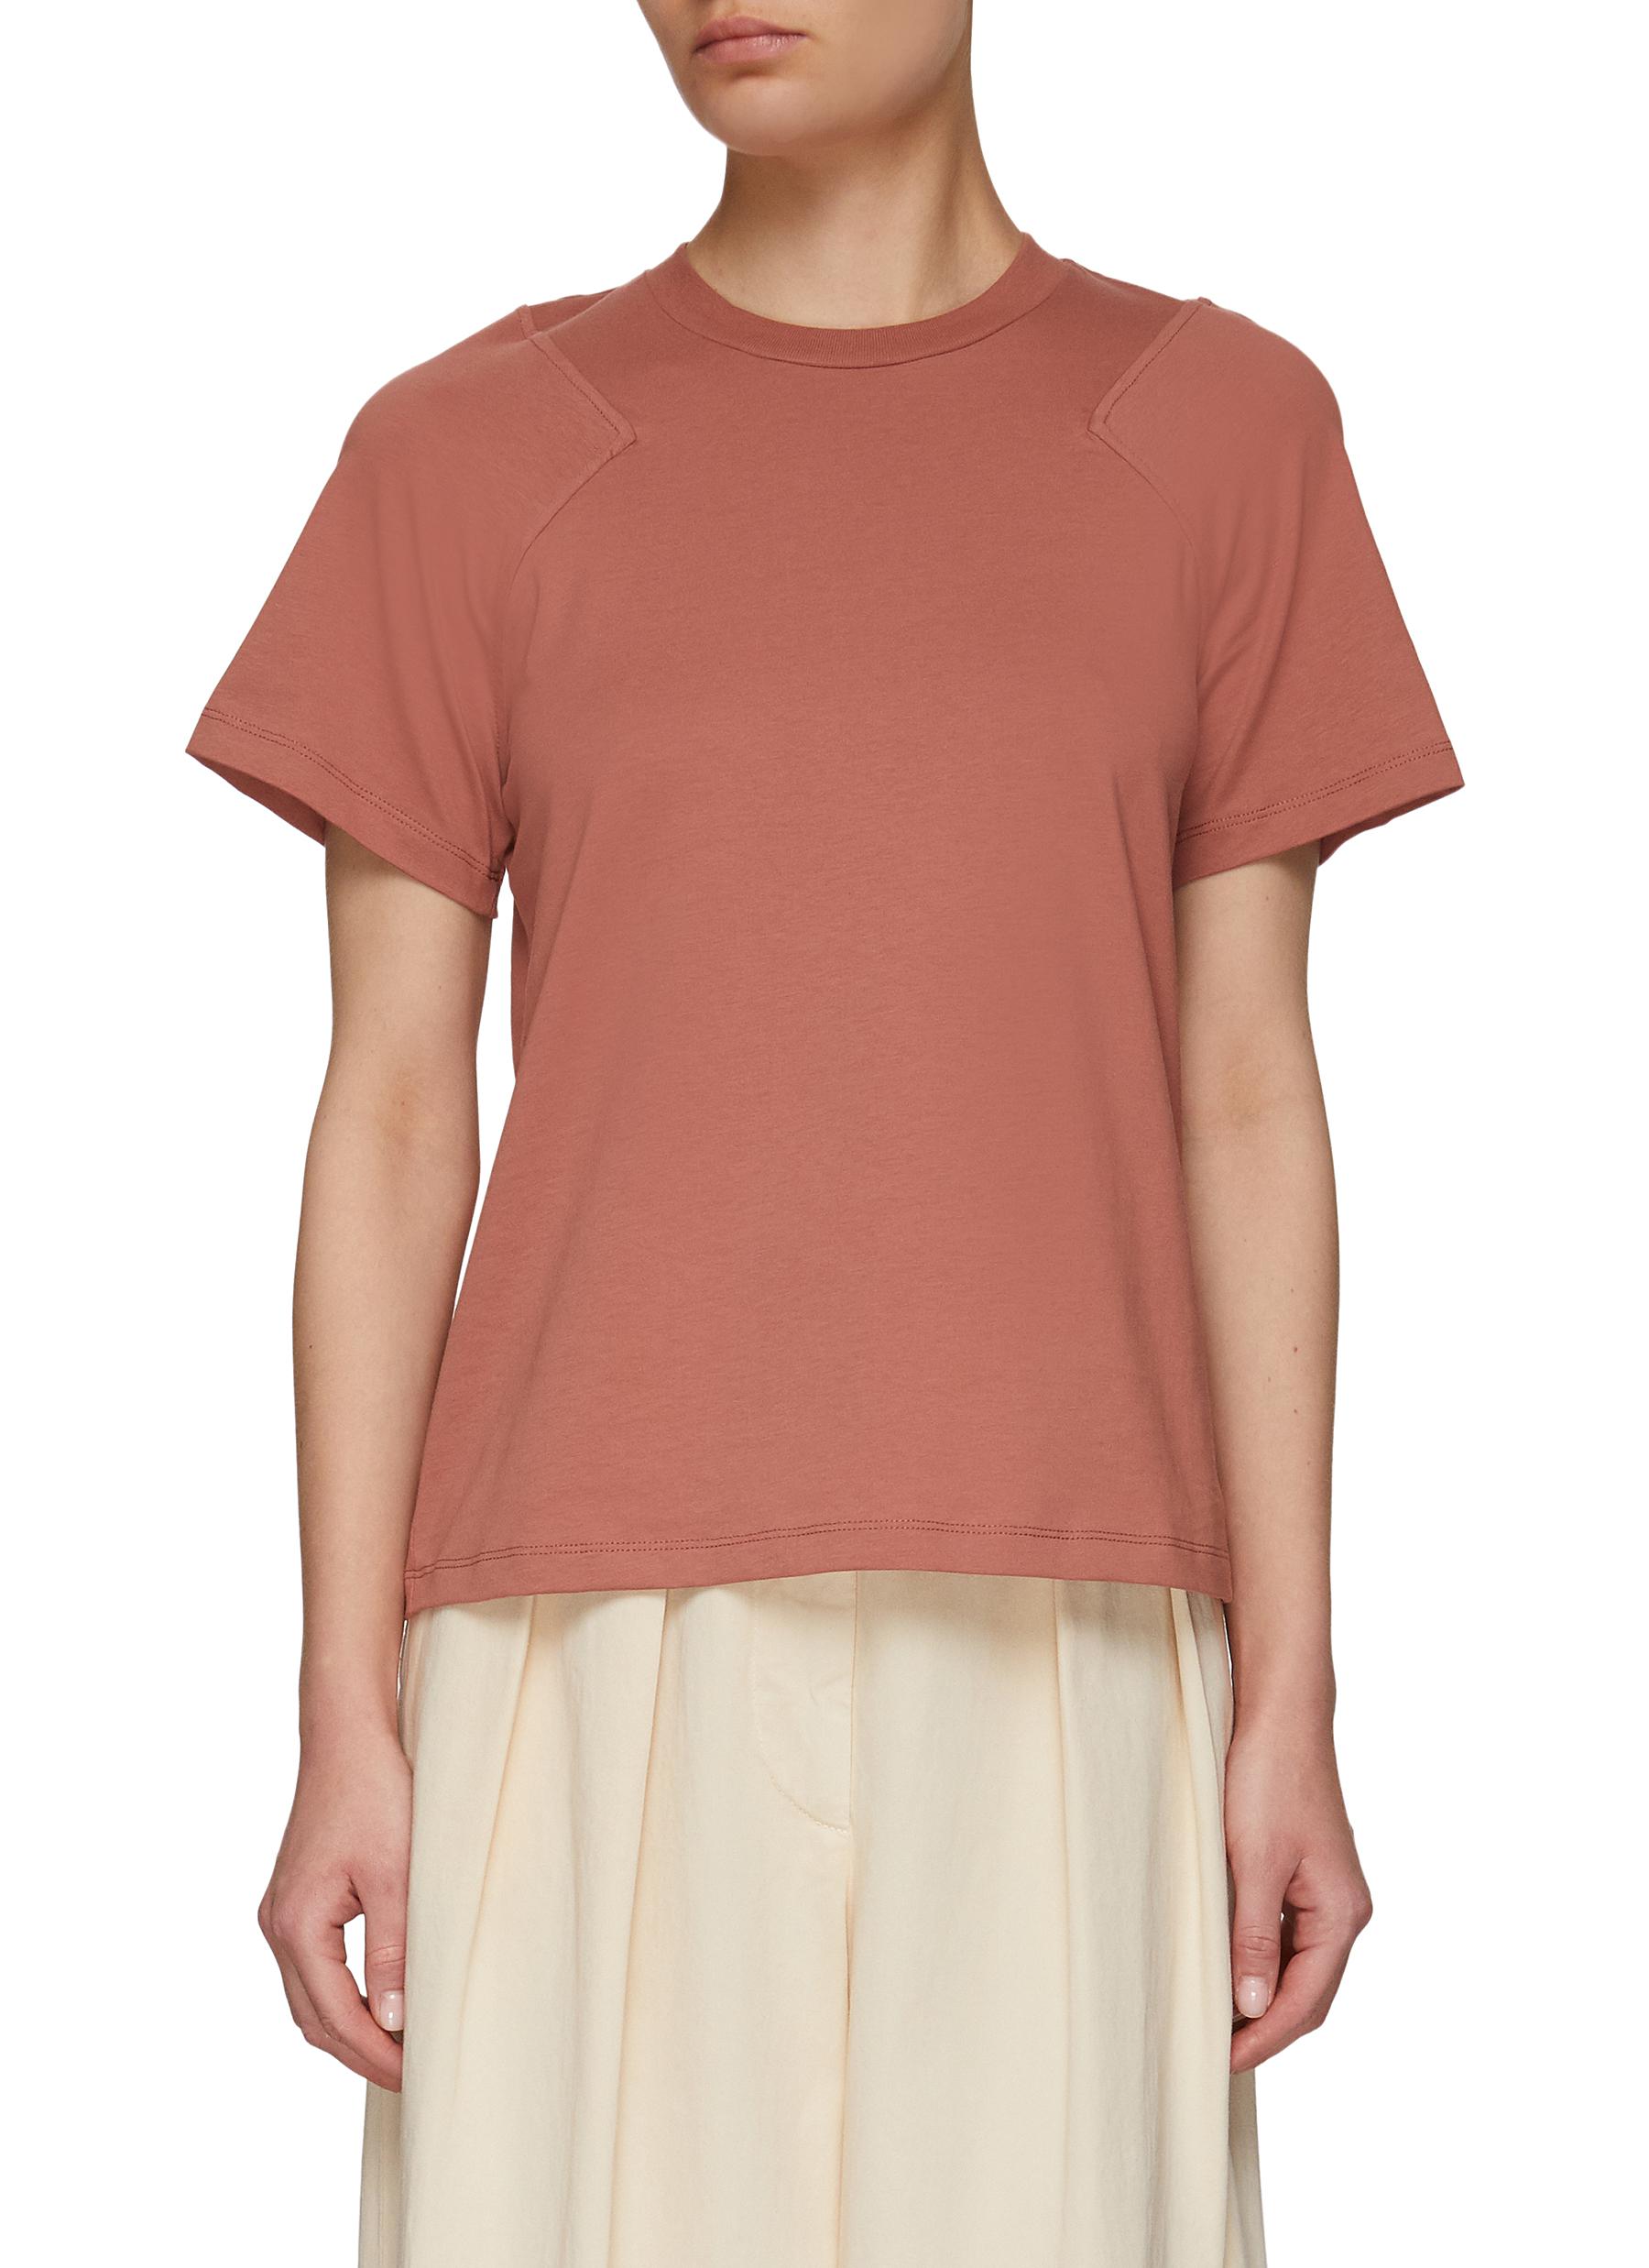 MARK KENLY DOMINO TAN Patched Sleeve Crewneck T-Shirt